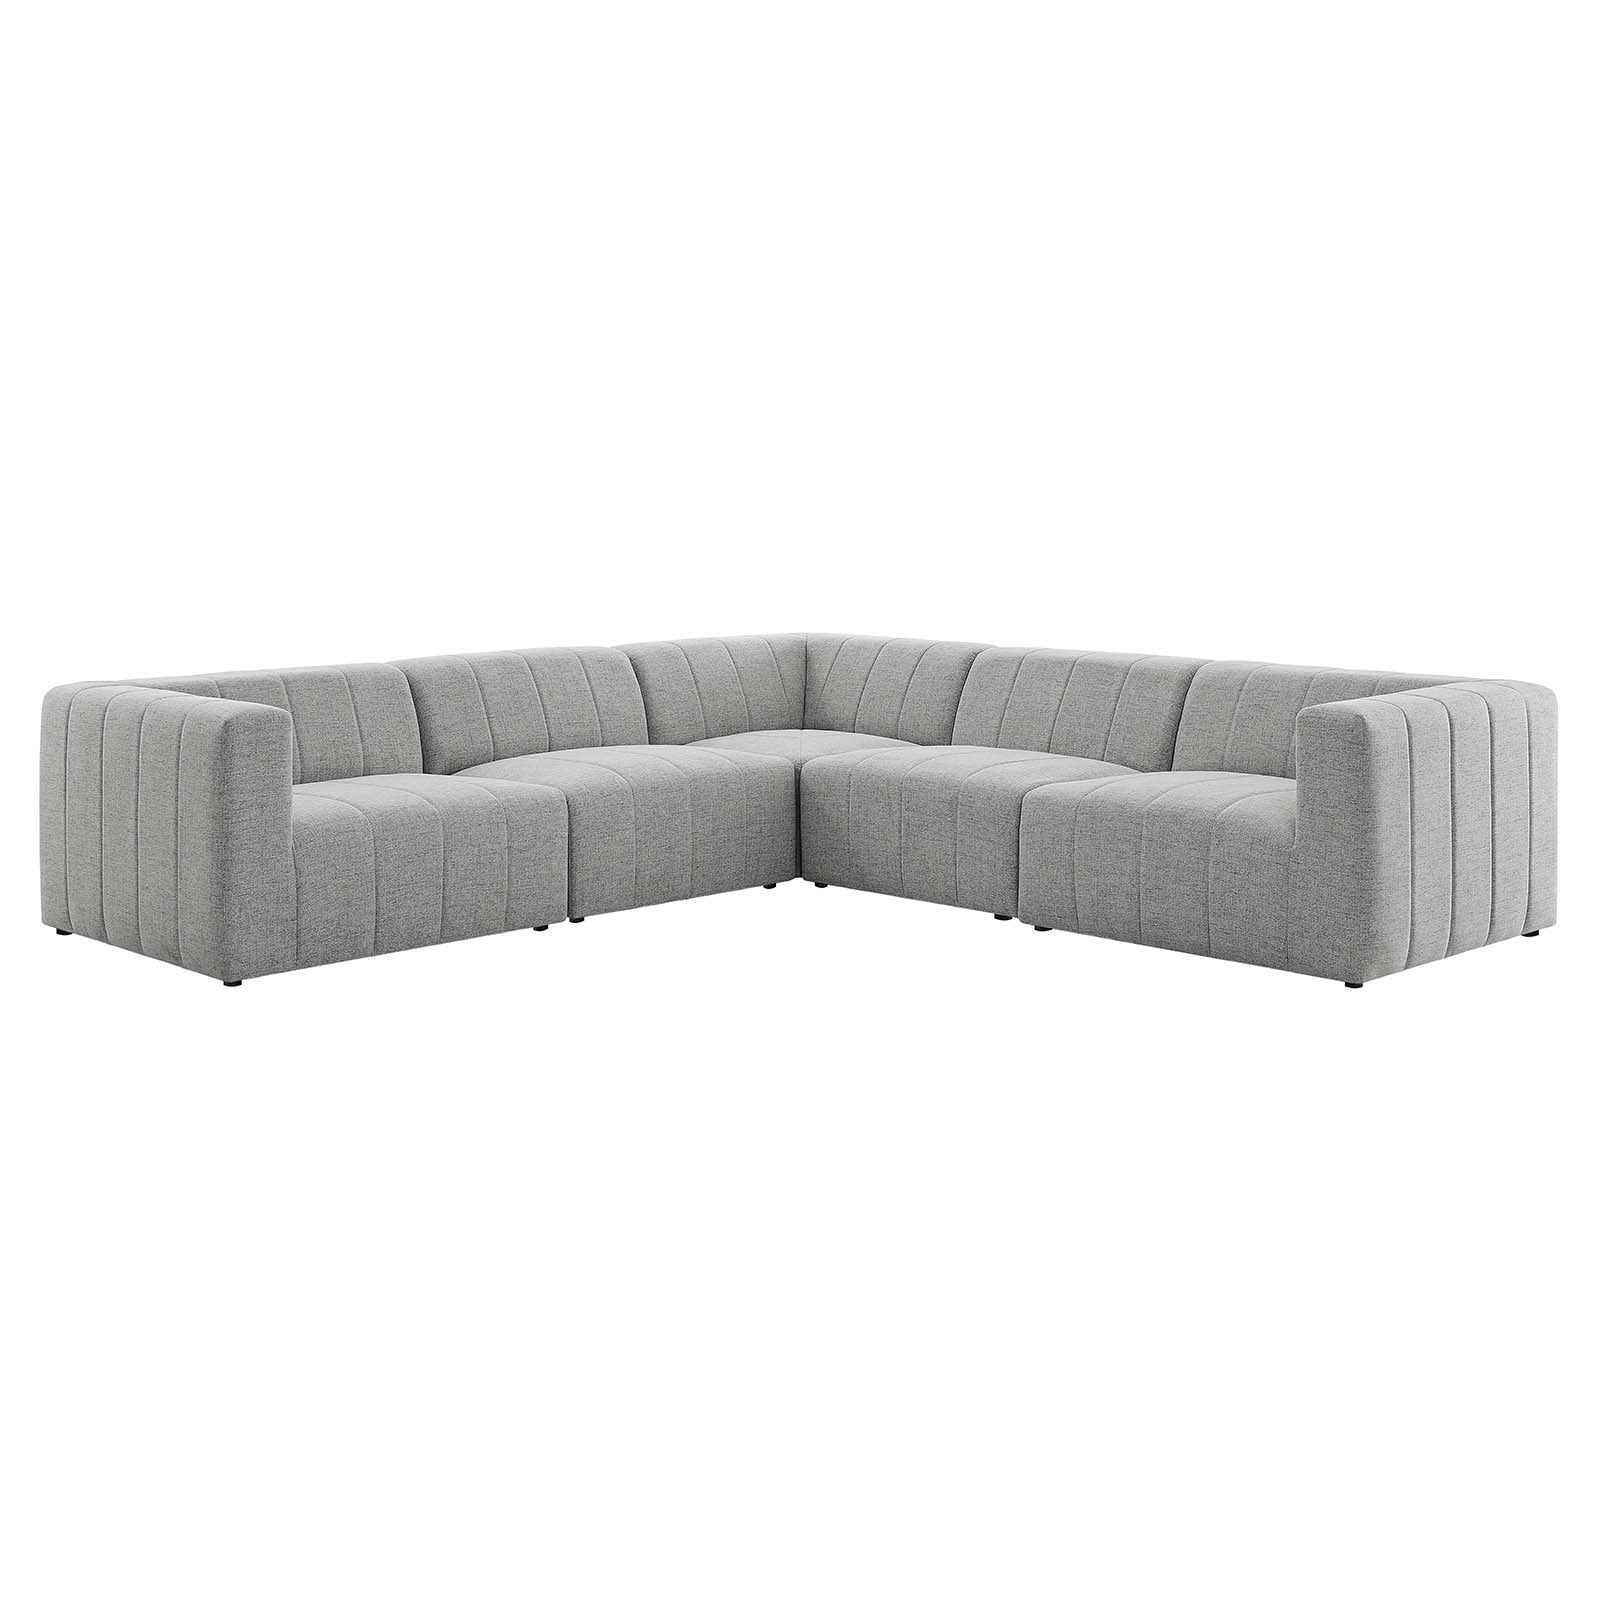 Modway Sectional Sofas - Bartlett Upholstered Fabric 5-Piece Sectional Sofa Light Gray